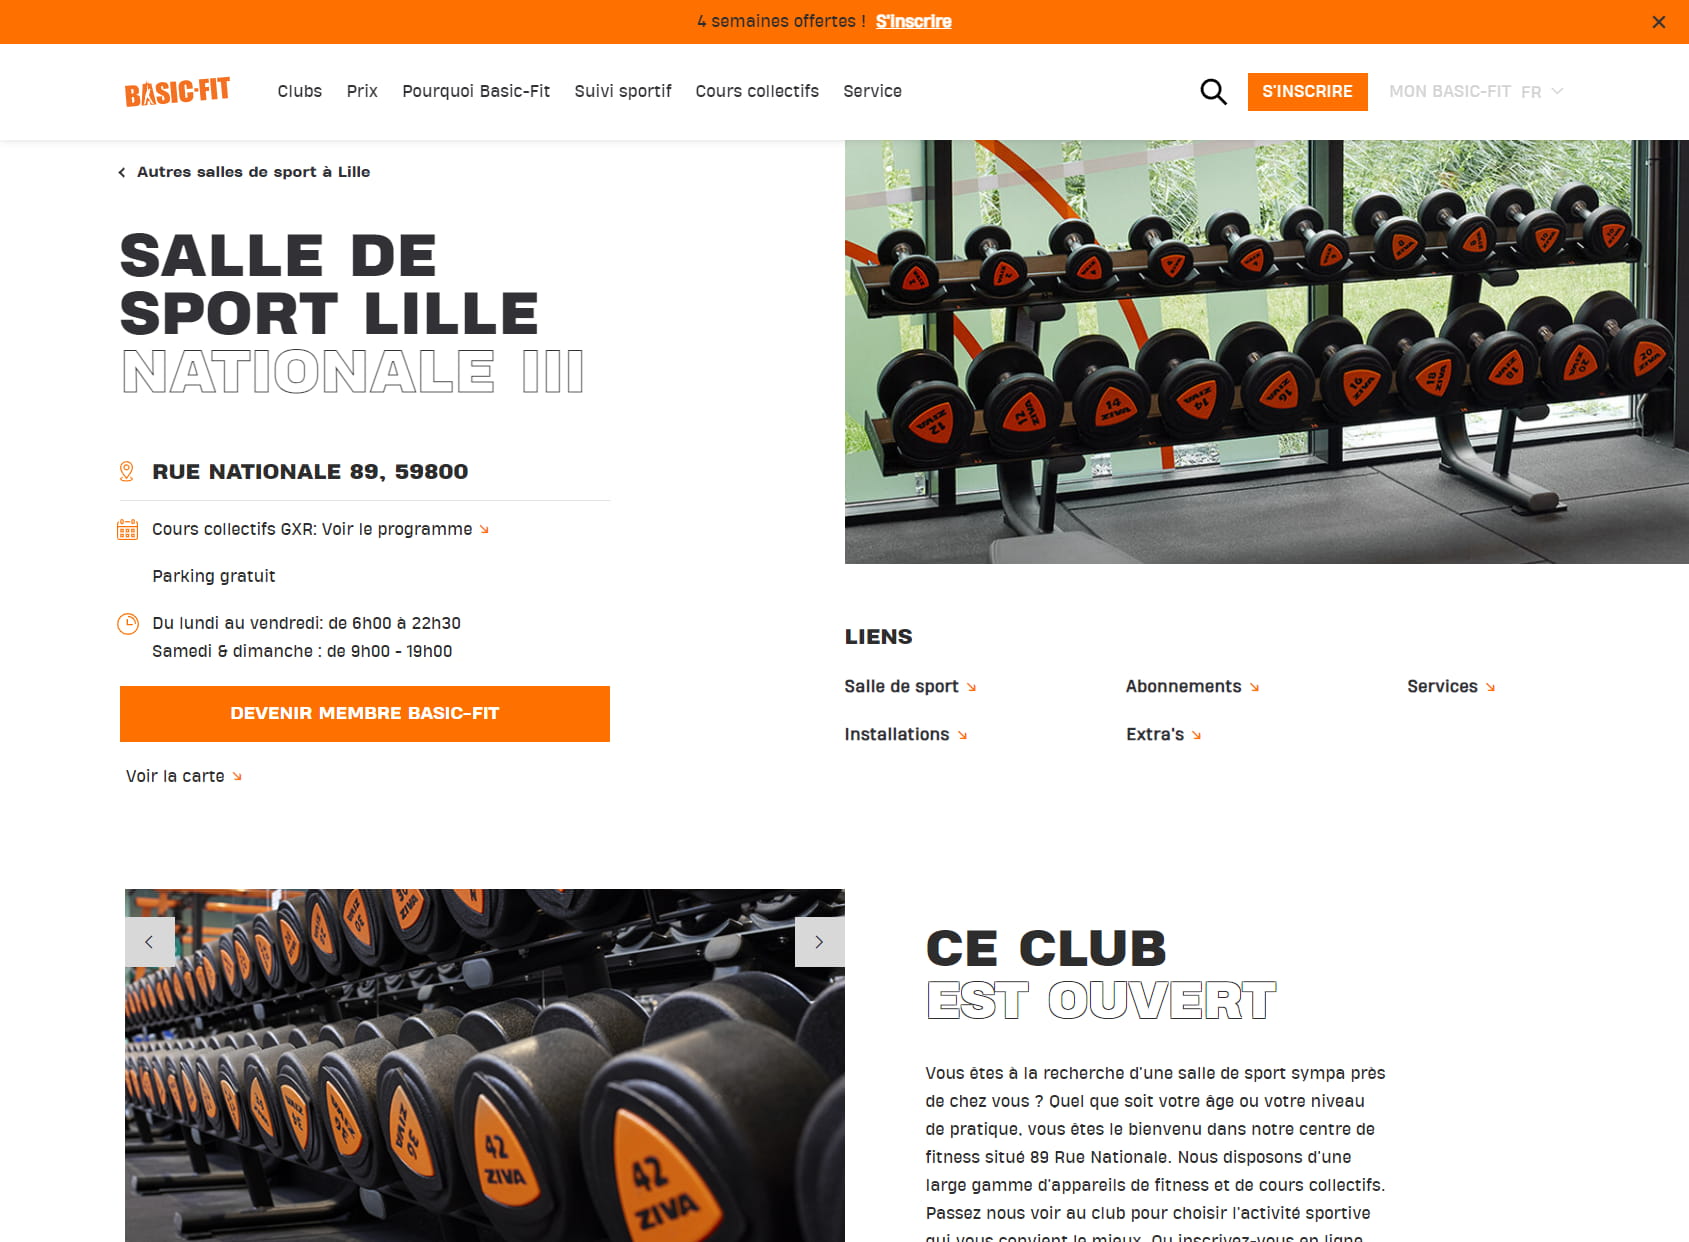 Basic-Fit Lille Nationale III